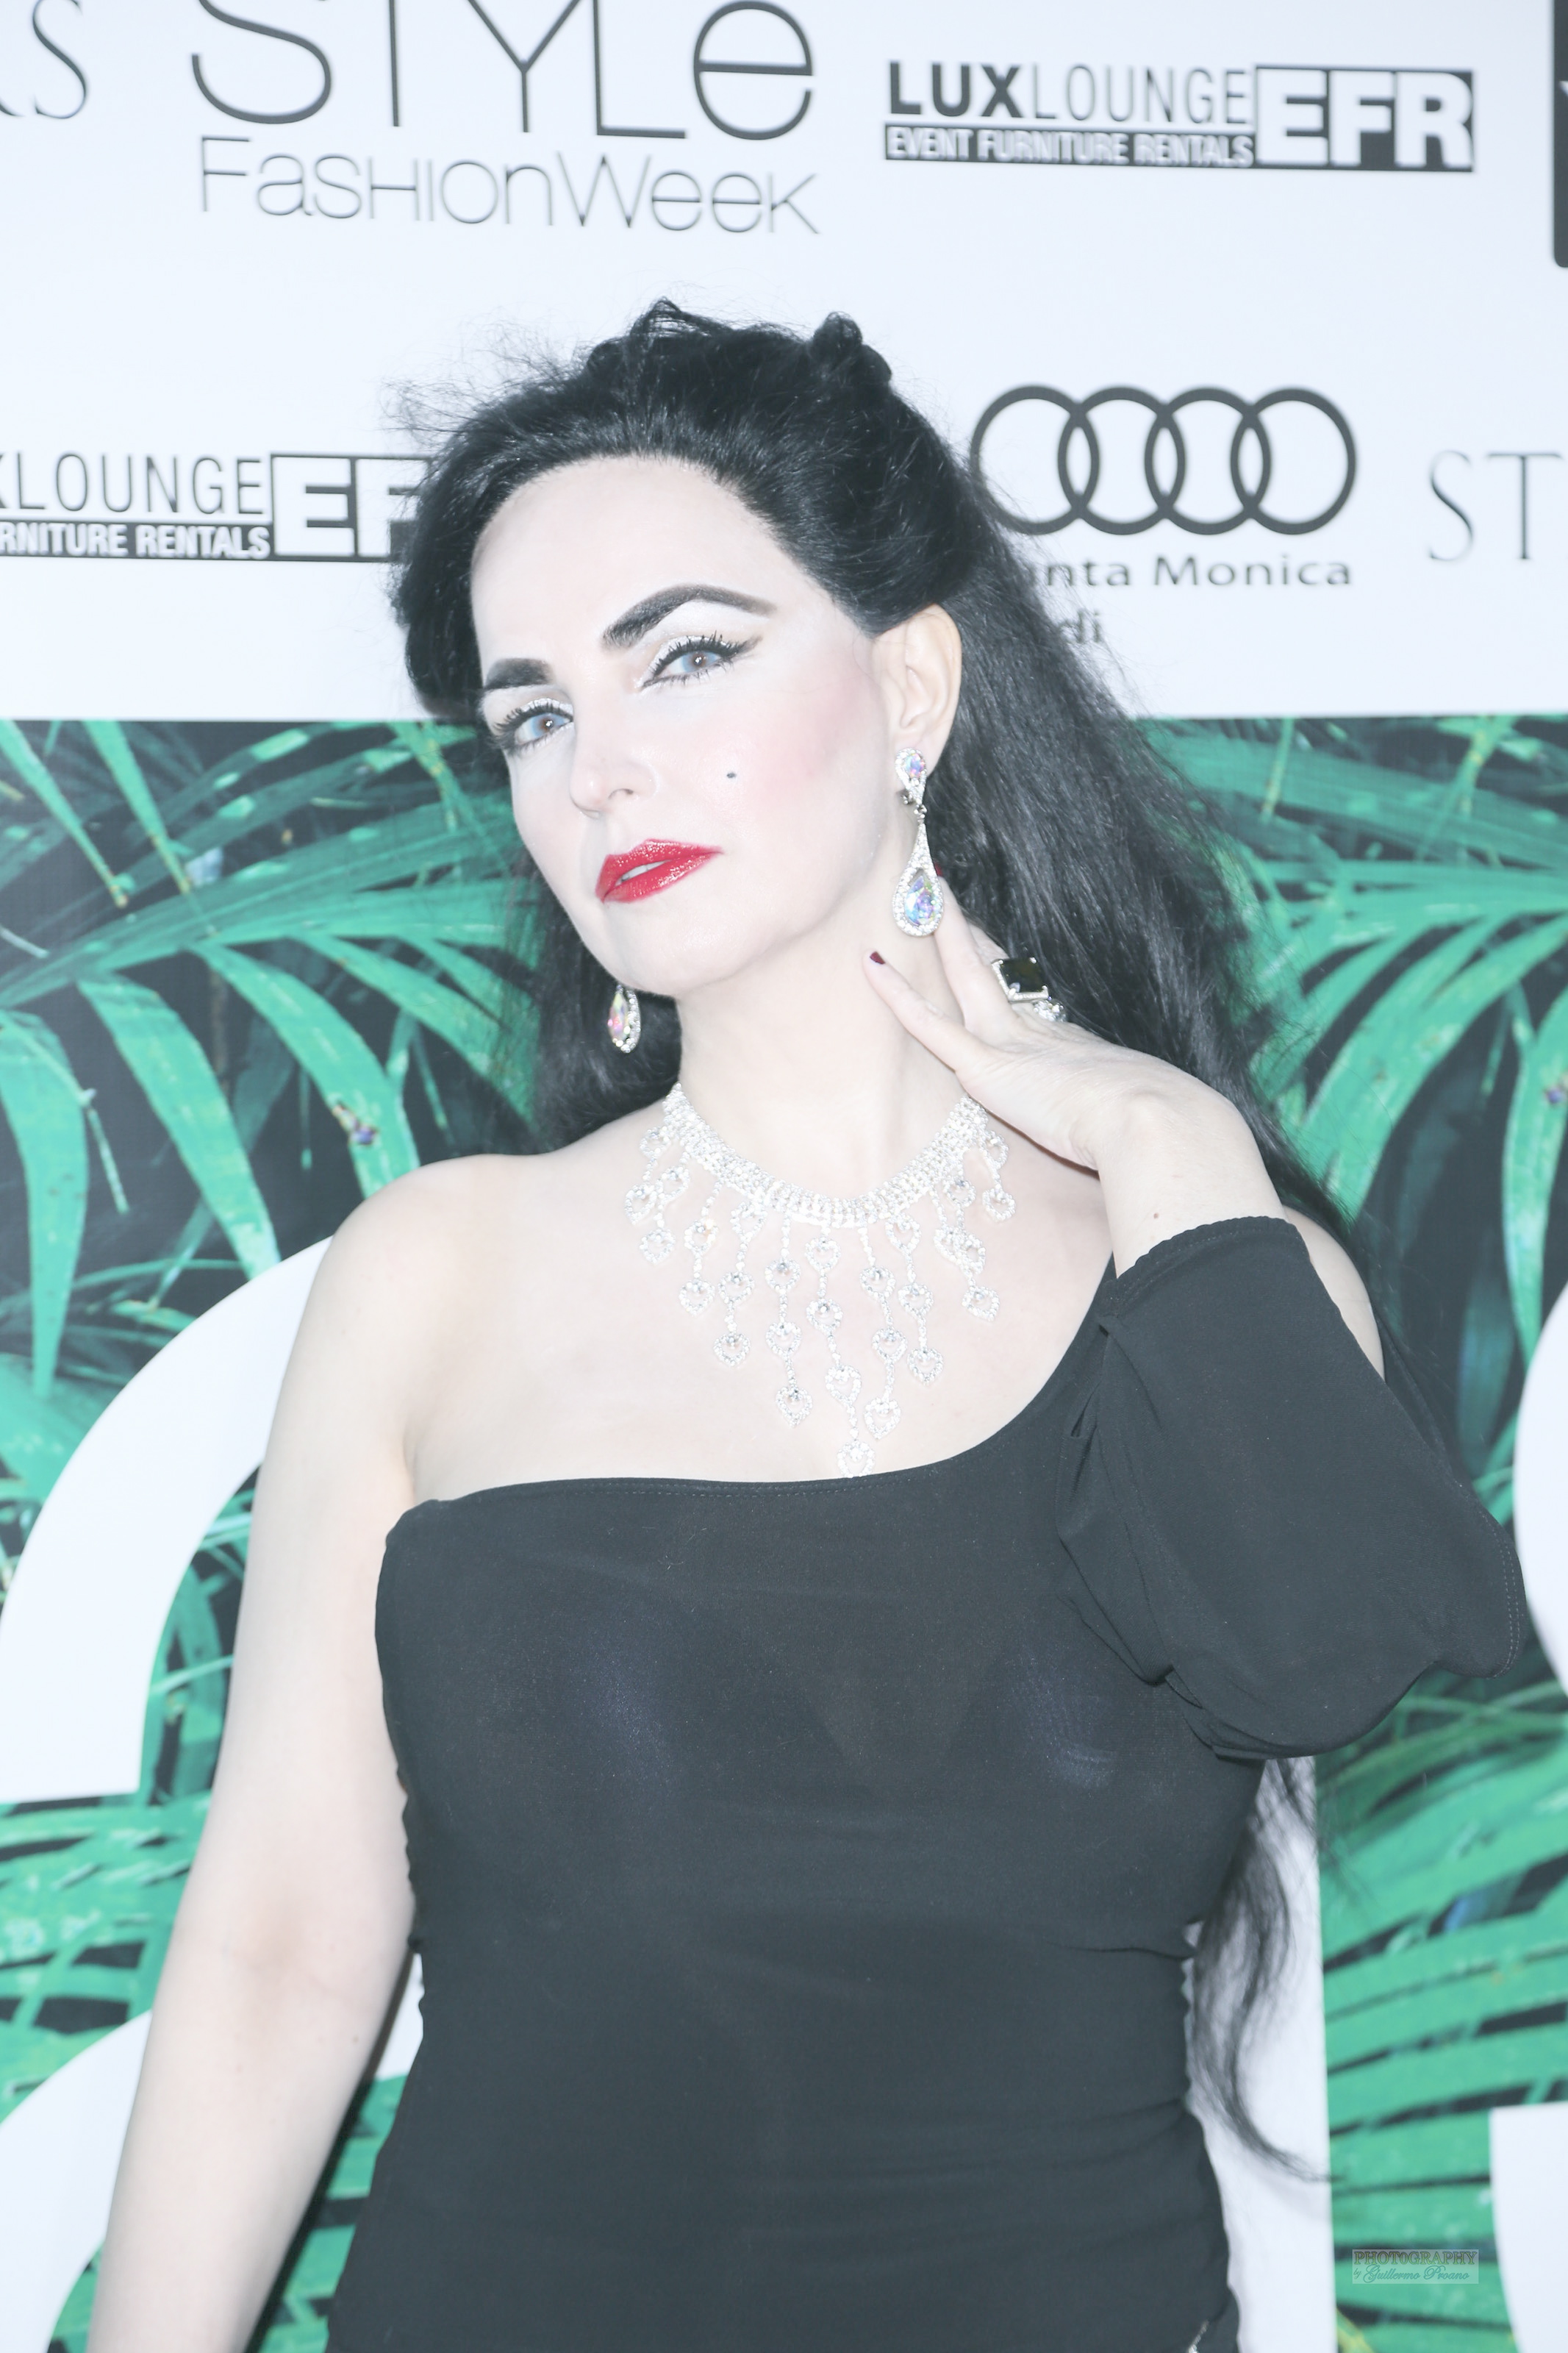 ALEXIS KILEY AT THE 2015 STYLE FASHION WEEK FEATURING FASHION DESIGNER ANDRE SORIANO- Young Elizabeth Taylor look alike and impersonator actress Alexis Ki ELIZABETH TAYLOR LOOK ALIKE FOR FILM, T.V., AND PRINT http://www.imdb.com/name/nm0000072/refer